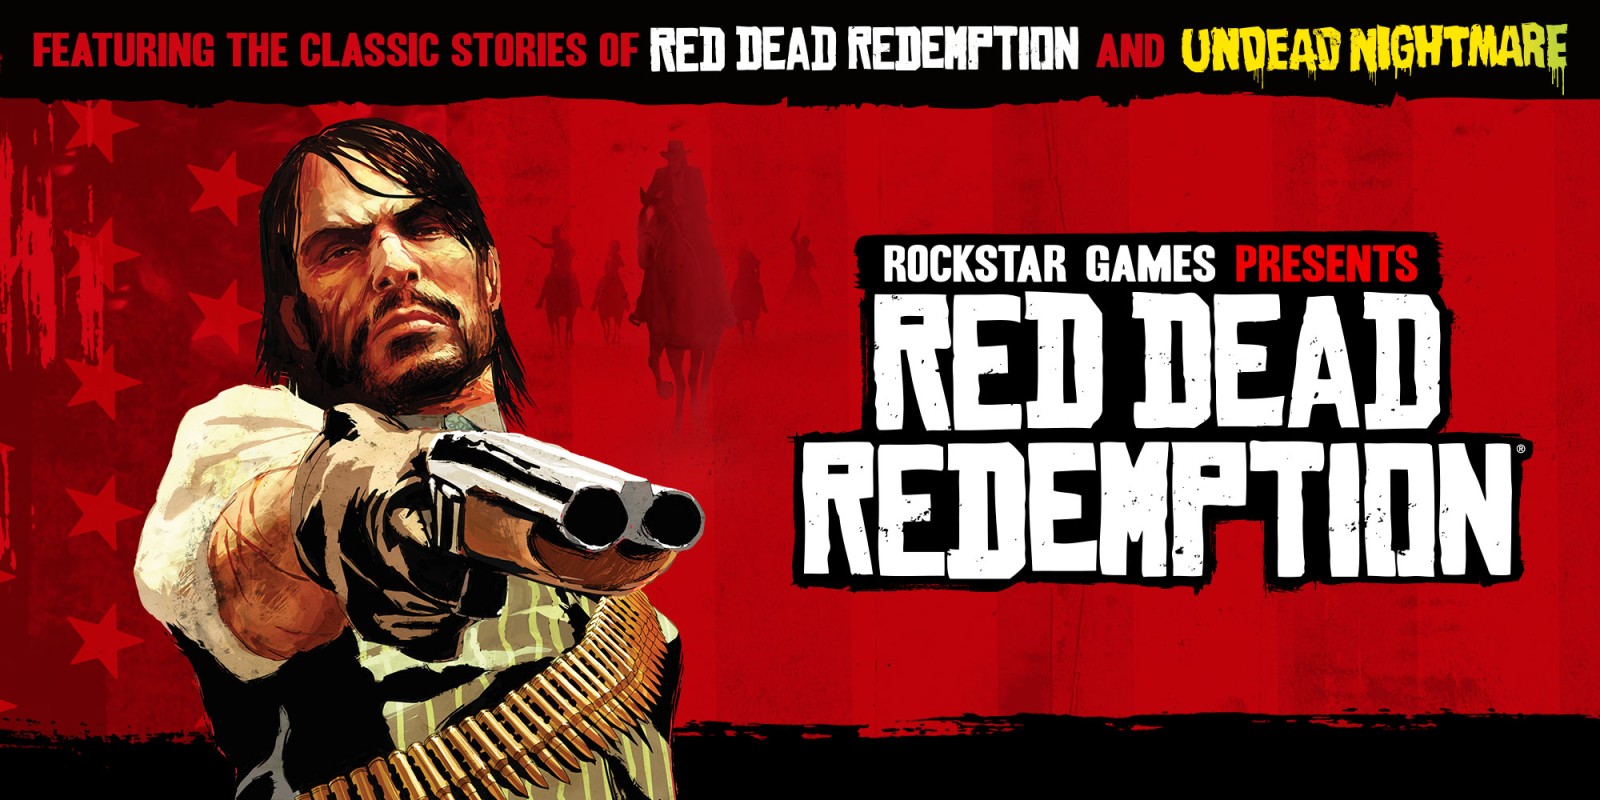 Red Dead Redemption and Undead Nightmare Coming to PS4 and Nintendo Switch